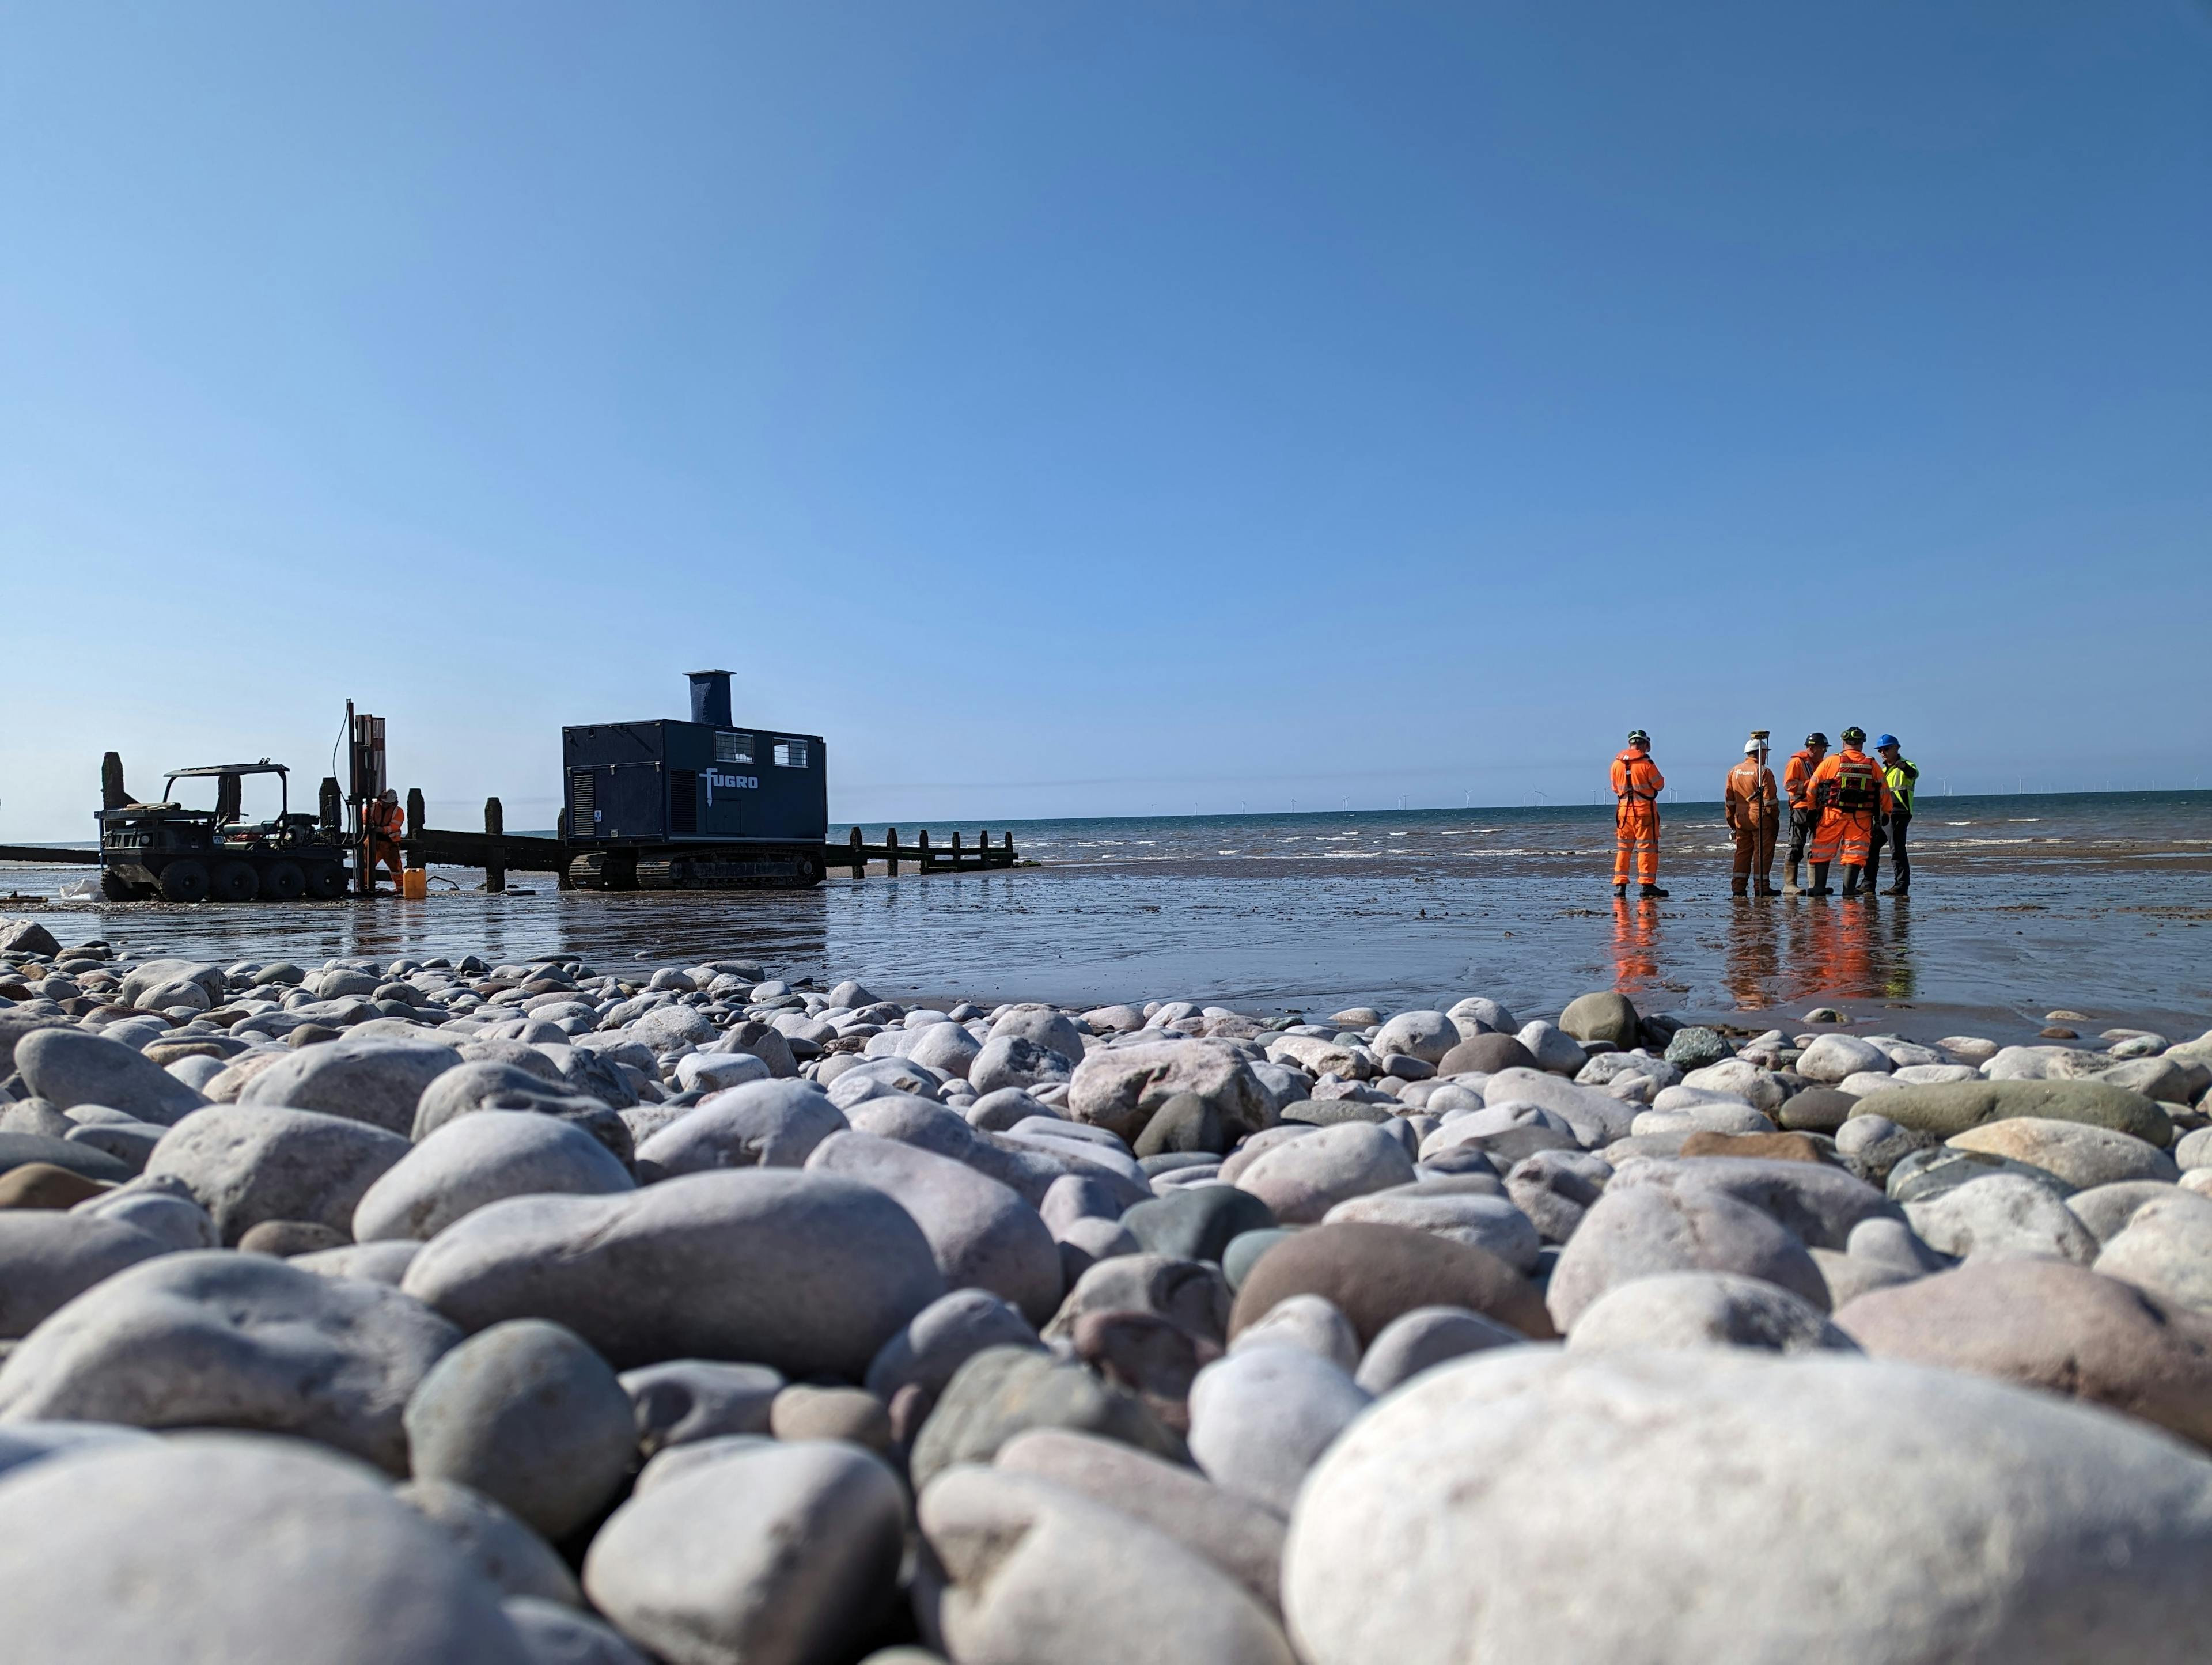 Deploying a CPT crawler from a landing barge to undertake a geotechnical ground survey on a beach for a wind farm cable landing.